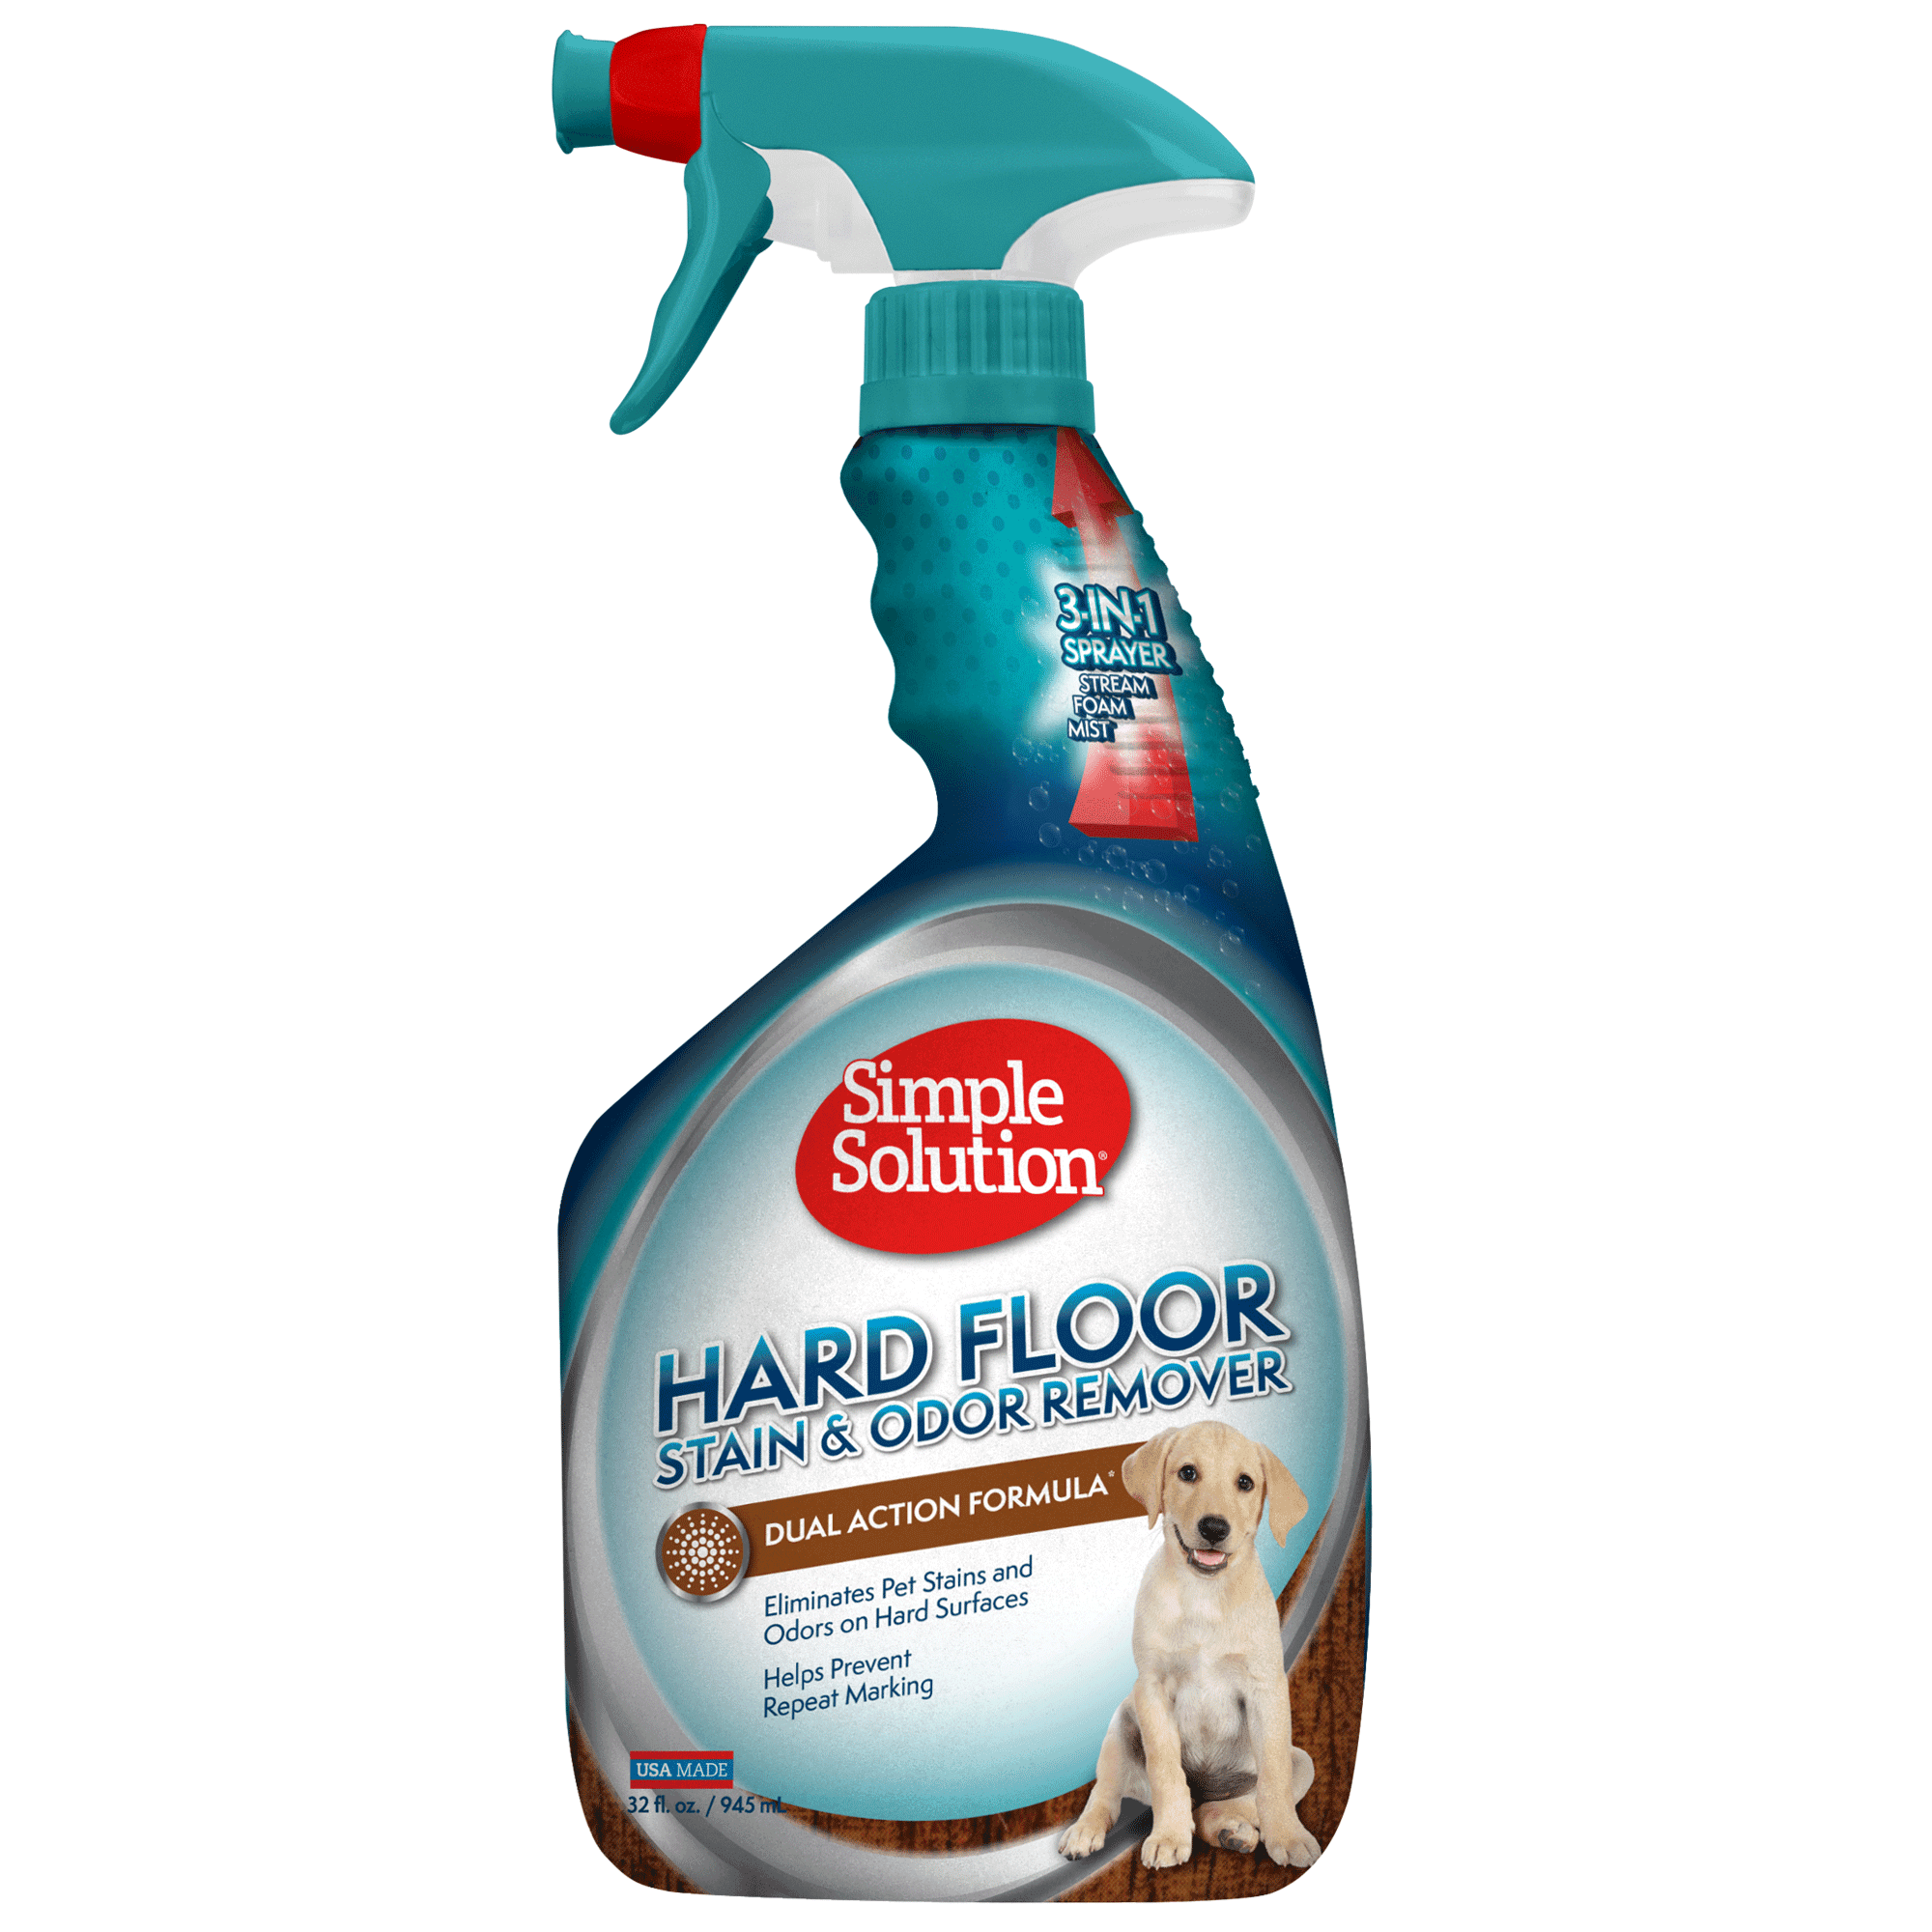 Hard Floor Pet Stain And Odor Remover, How To Get Rid Of Pet Urine Odor On Hardwood Floors